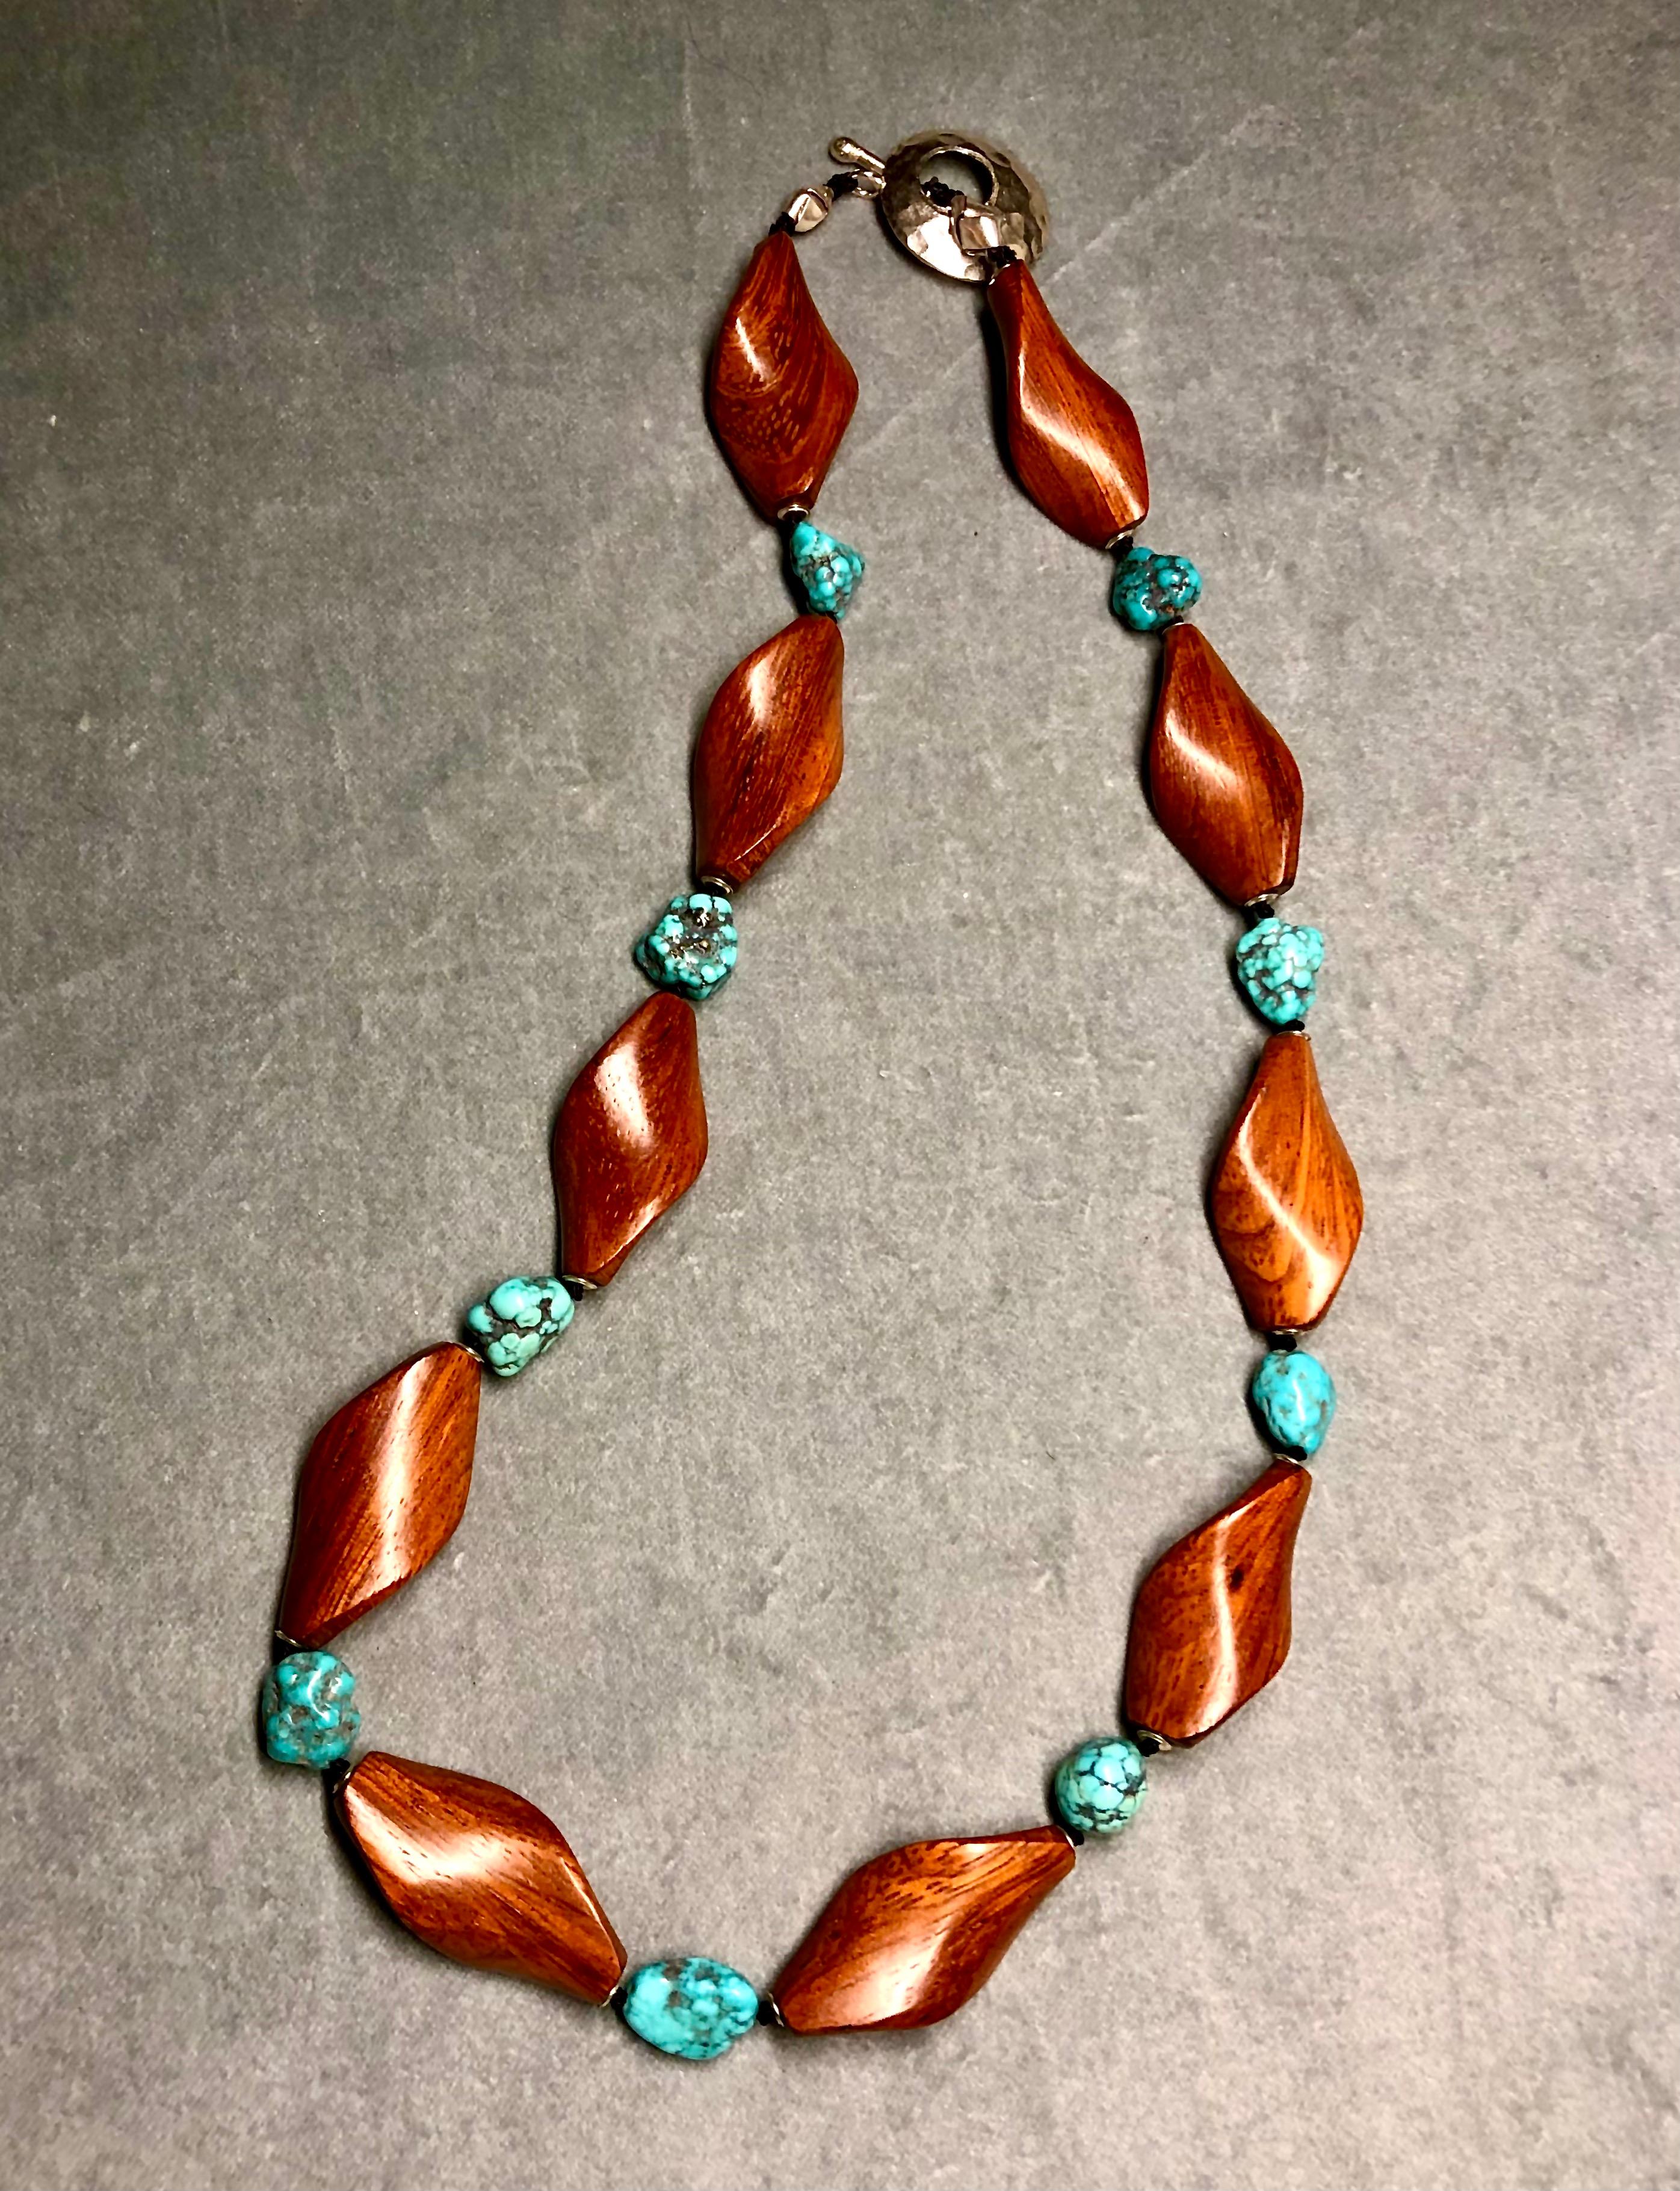 Single strand necklace, spiral carved exotic wooden beads flanking spider veined turquoise tumbled nuggets themselves flanked with sterling silver rondelles. Finished with sterling silver toggle clasp. 